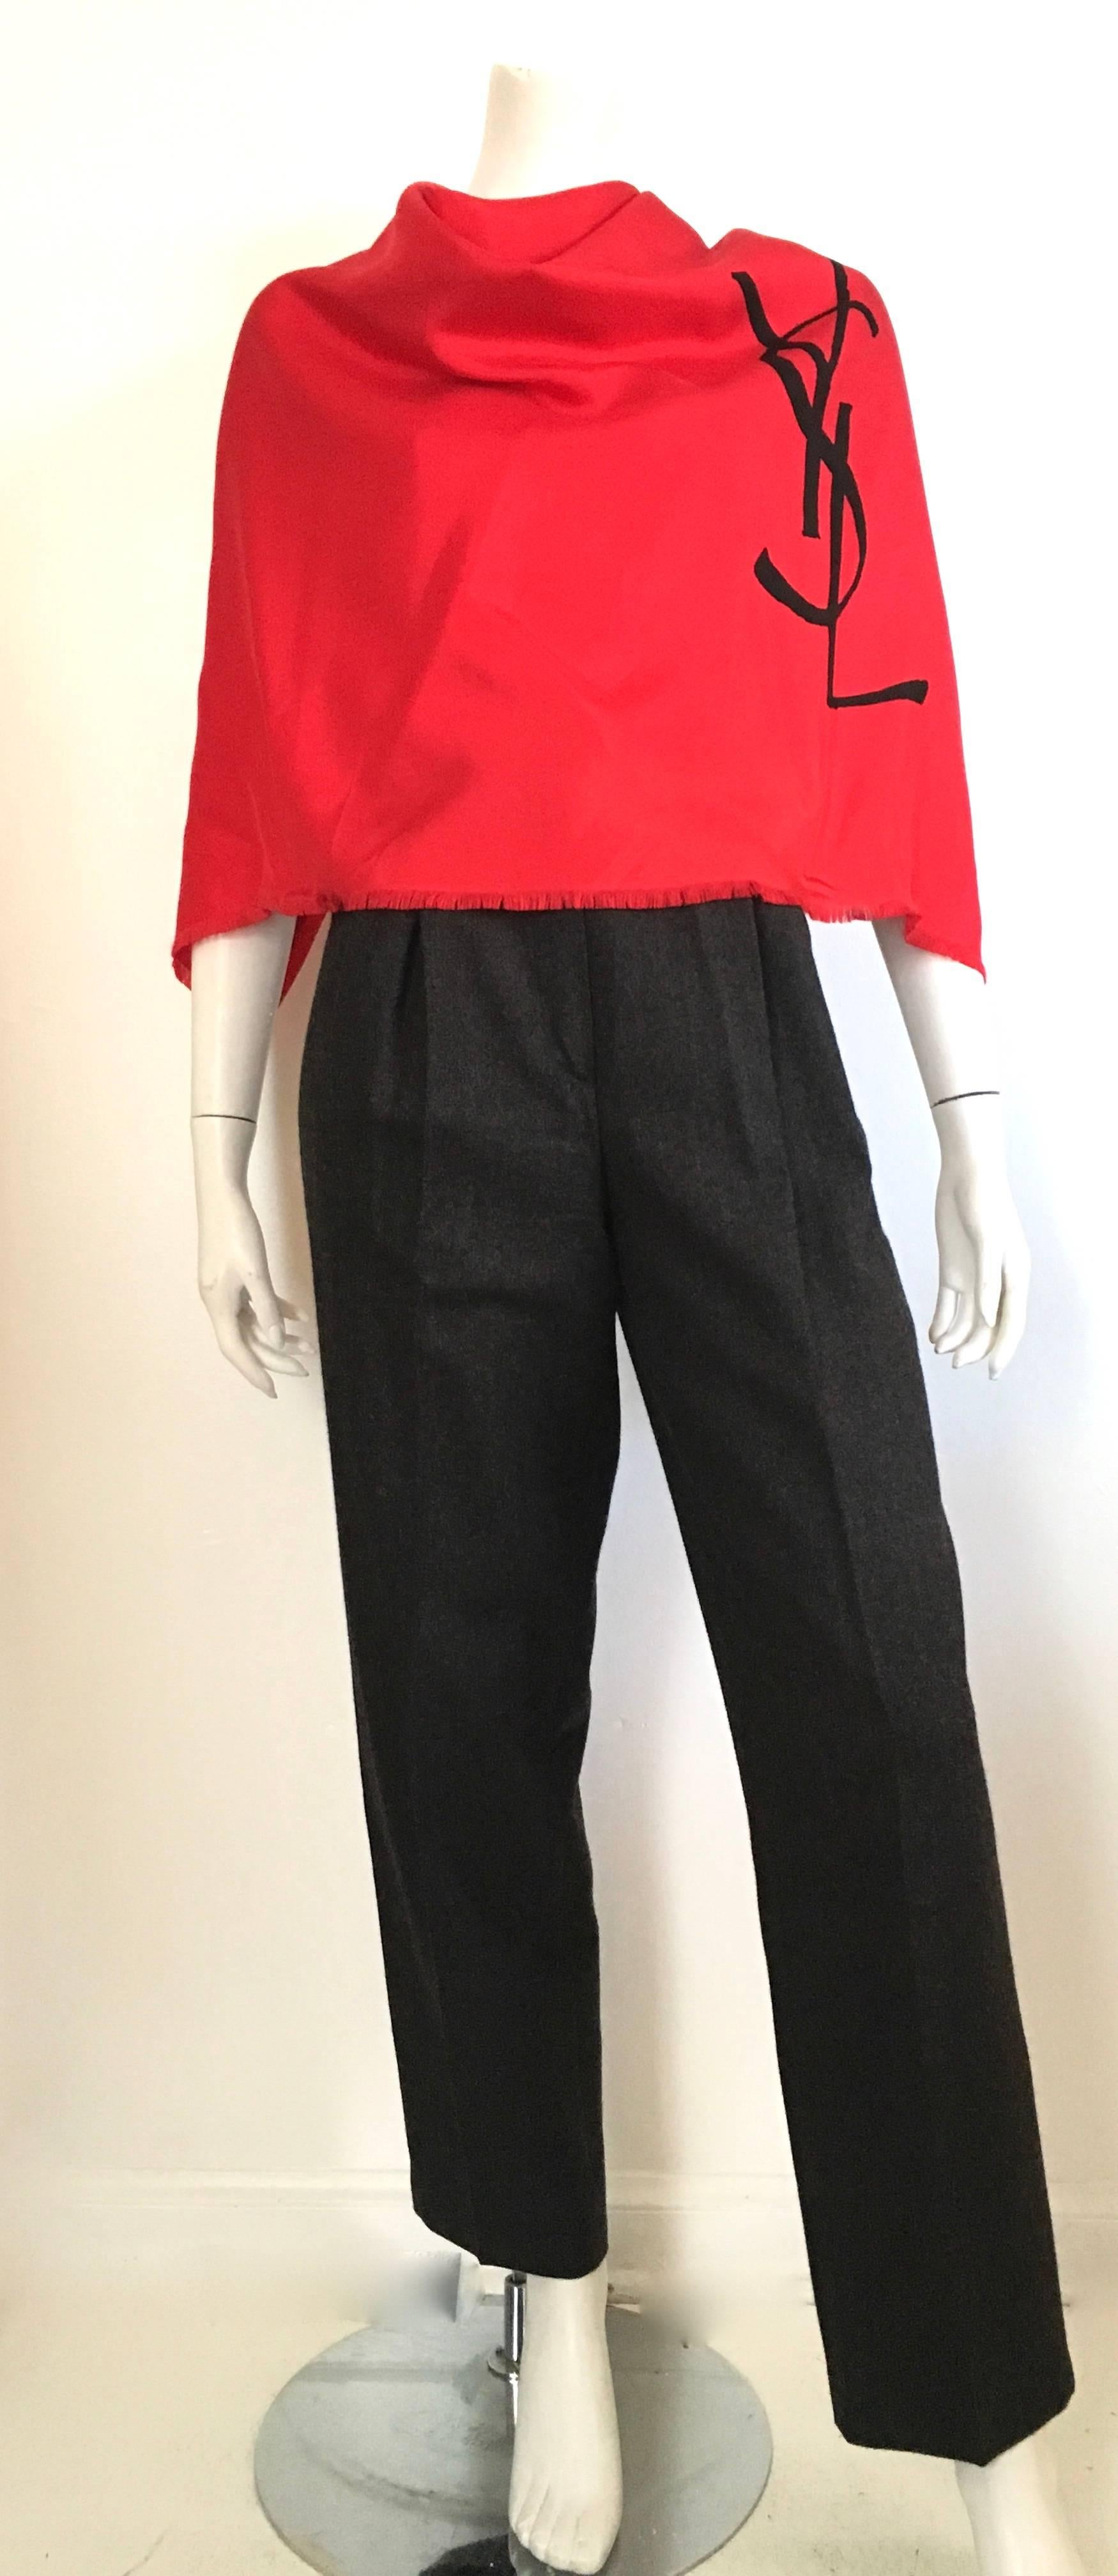 Valentino classic grey pleated wool pants with pockets are labeled a size 6 but fit like a modern USA size 4. Ladies please grab your tape measure so you can properly measure your waist & hips to make certain these gorgeous Valentino pants will